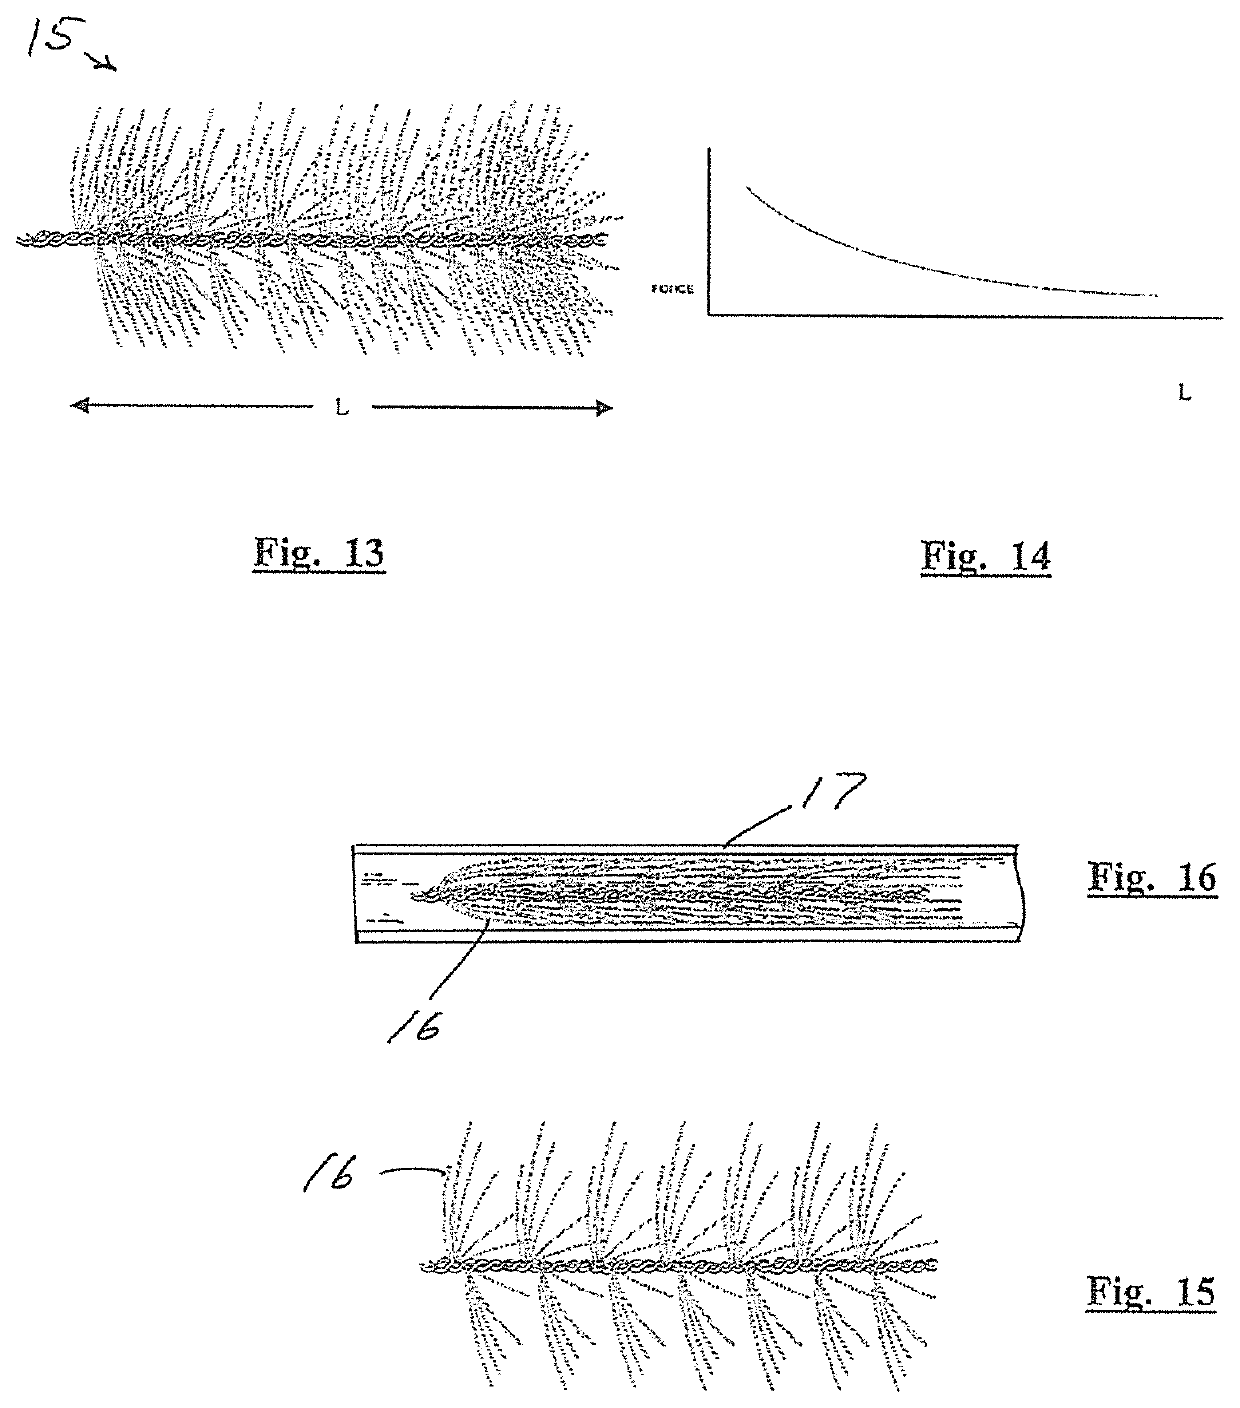 Embolisation systems